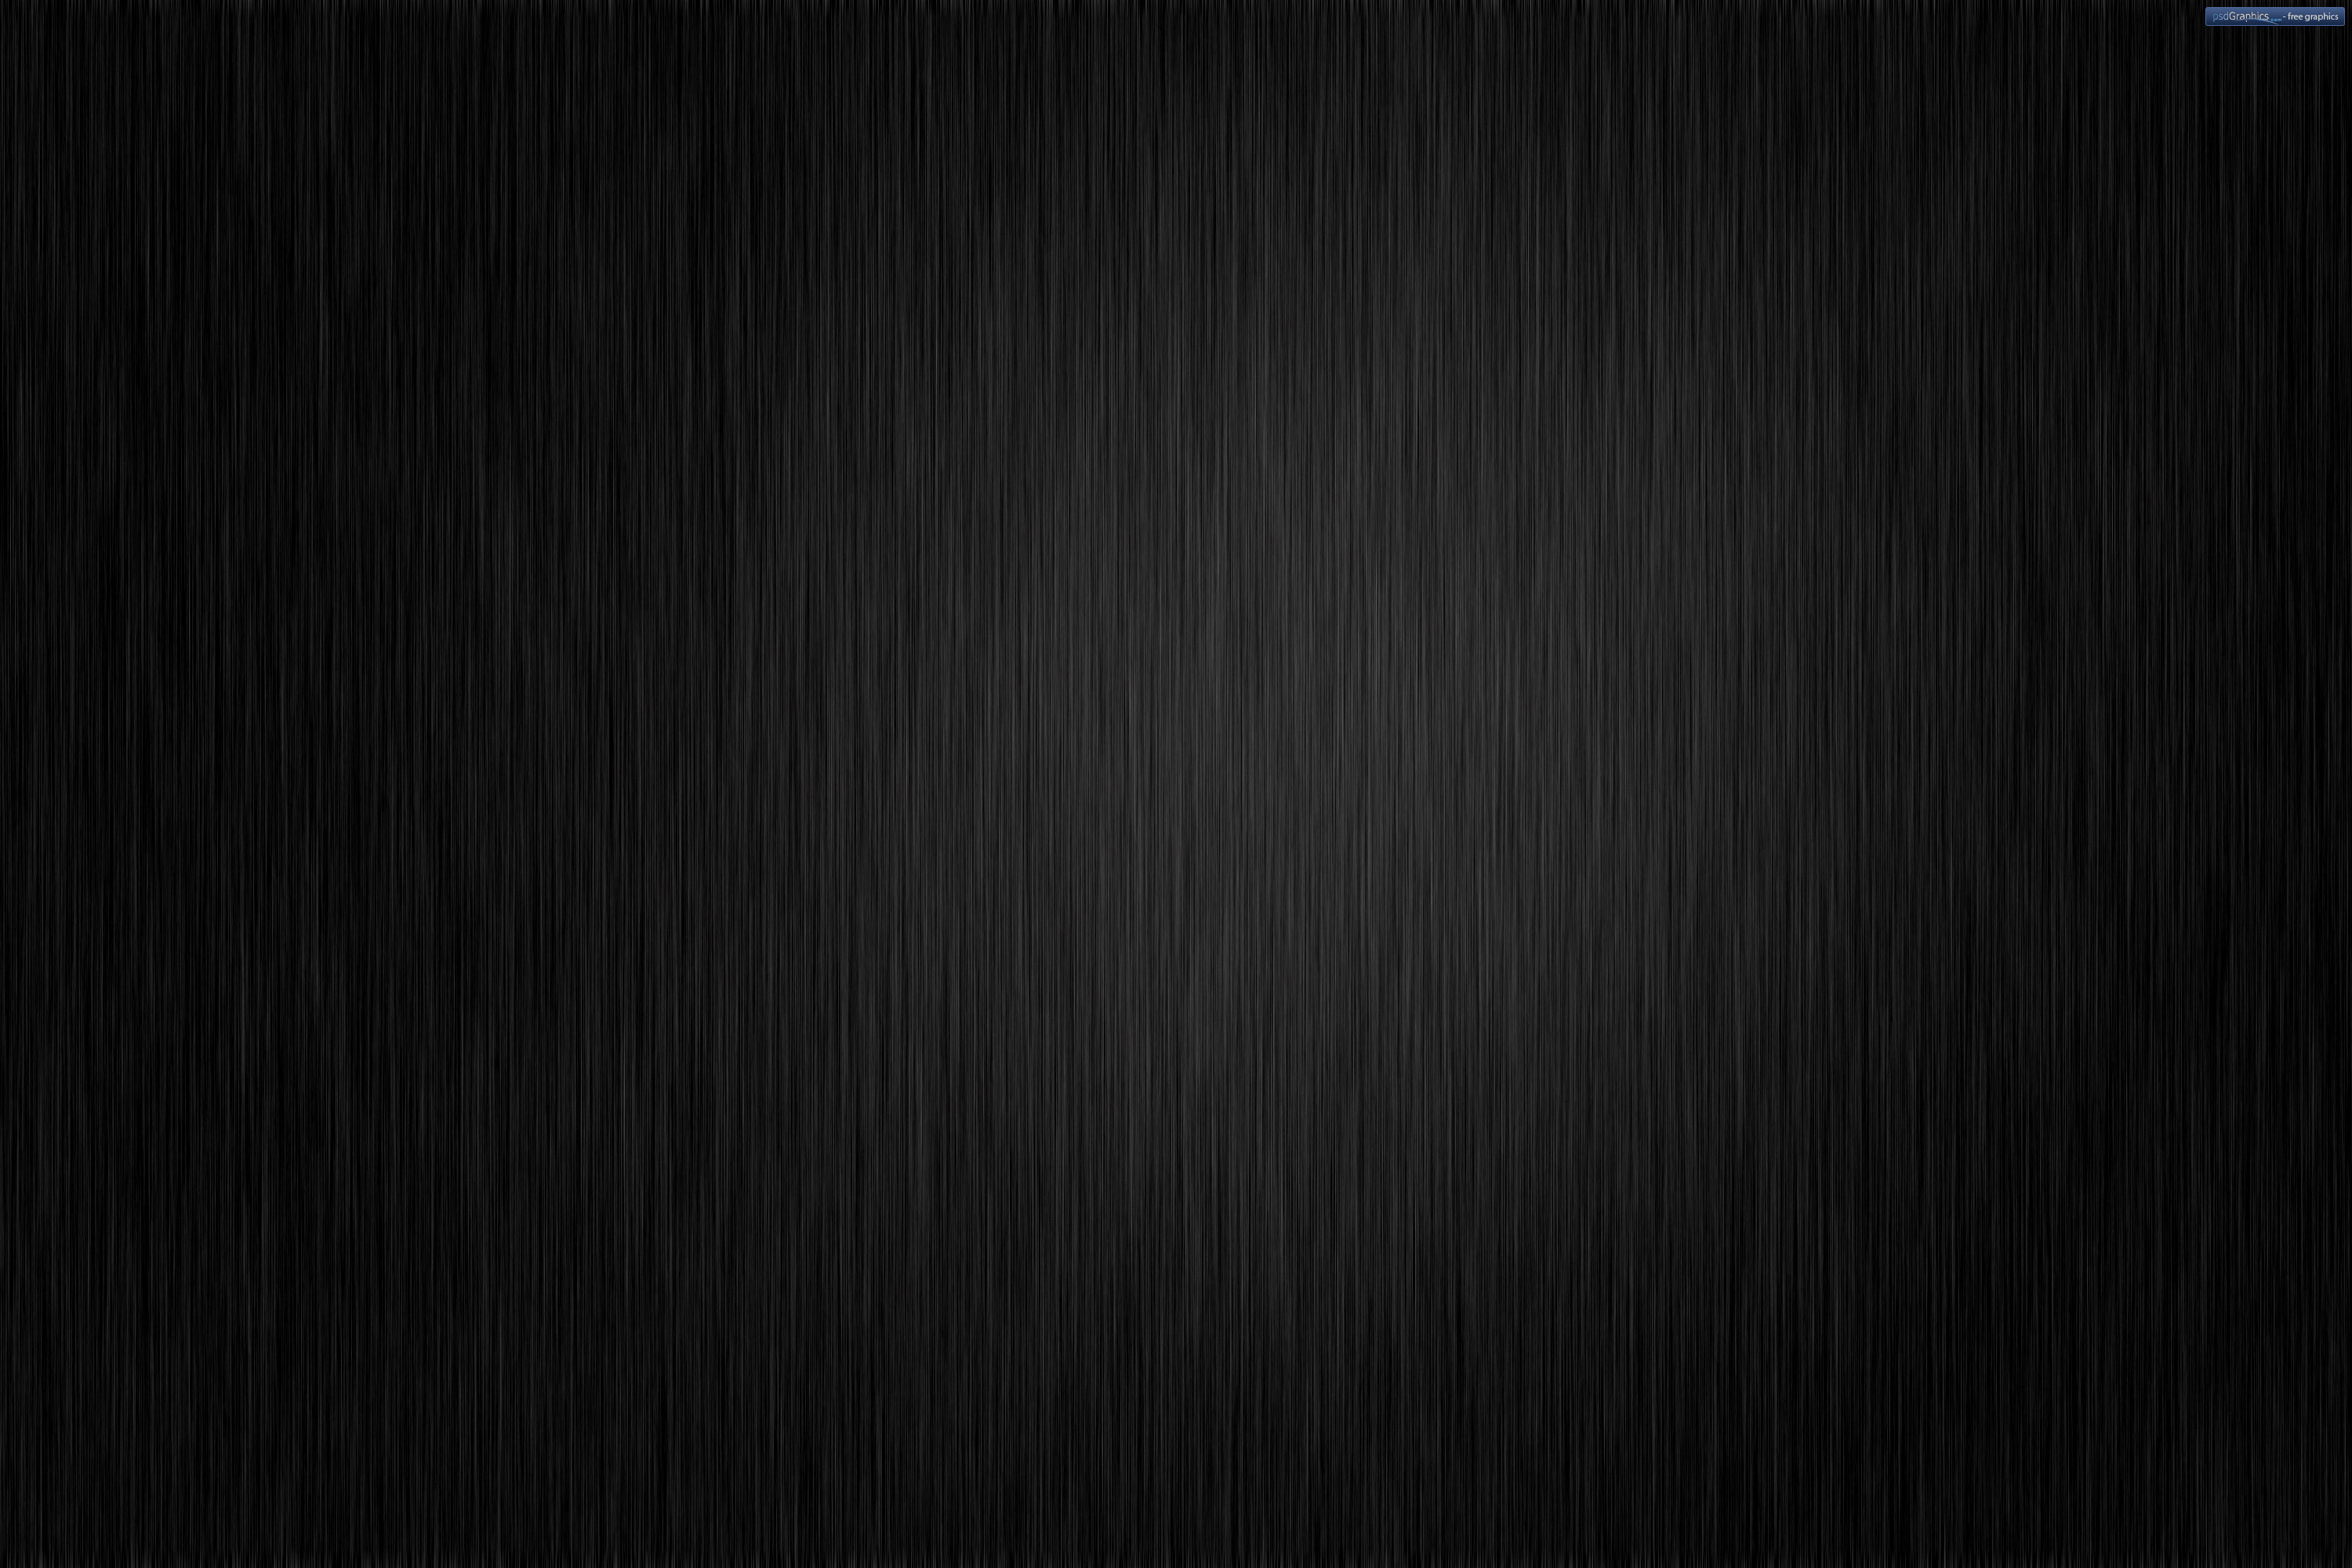 Static Dark Background Simple Black And White Liniar